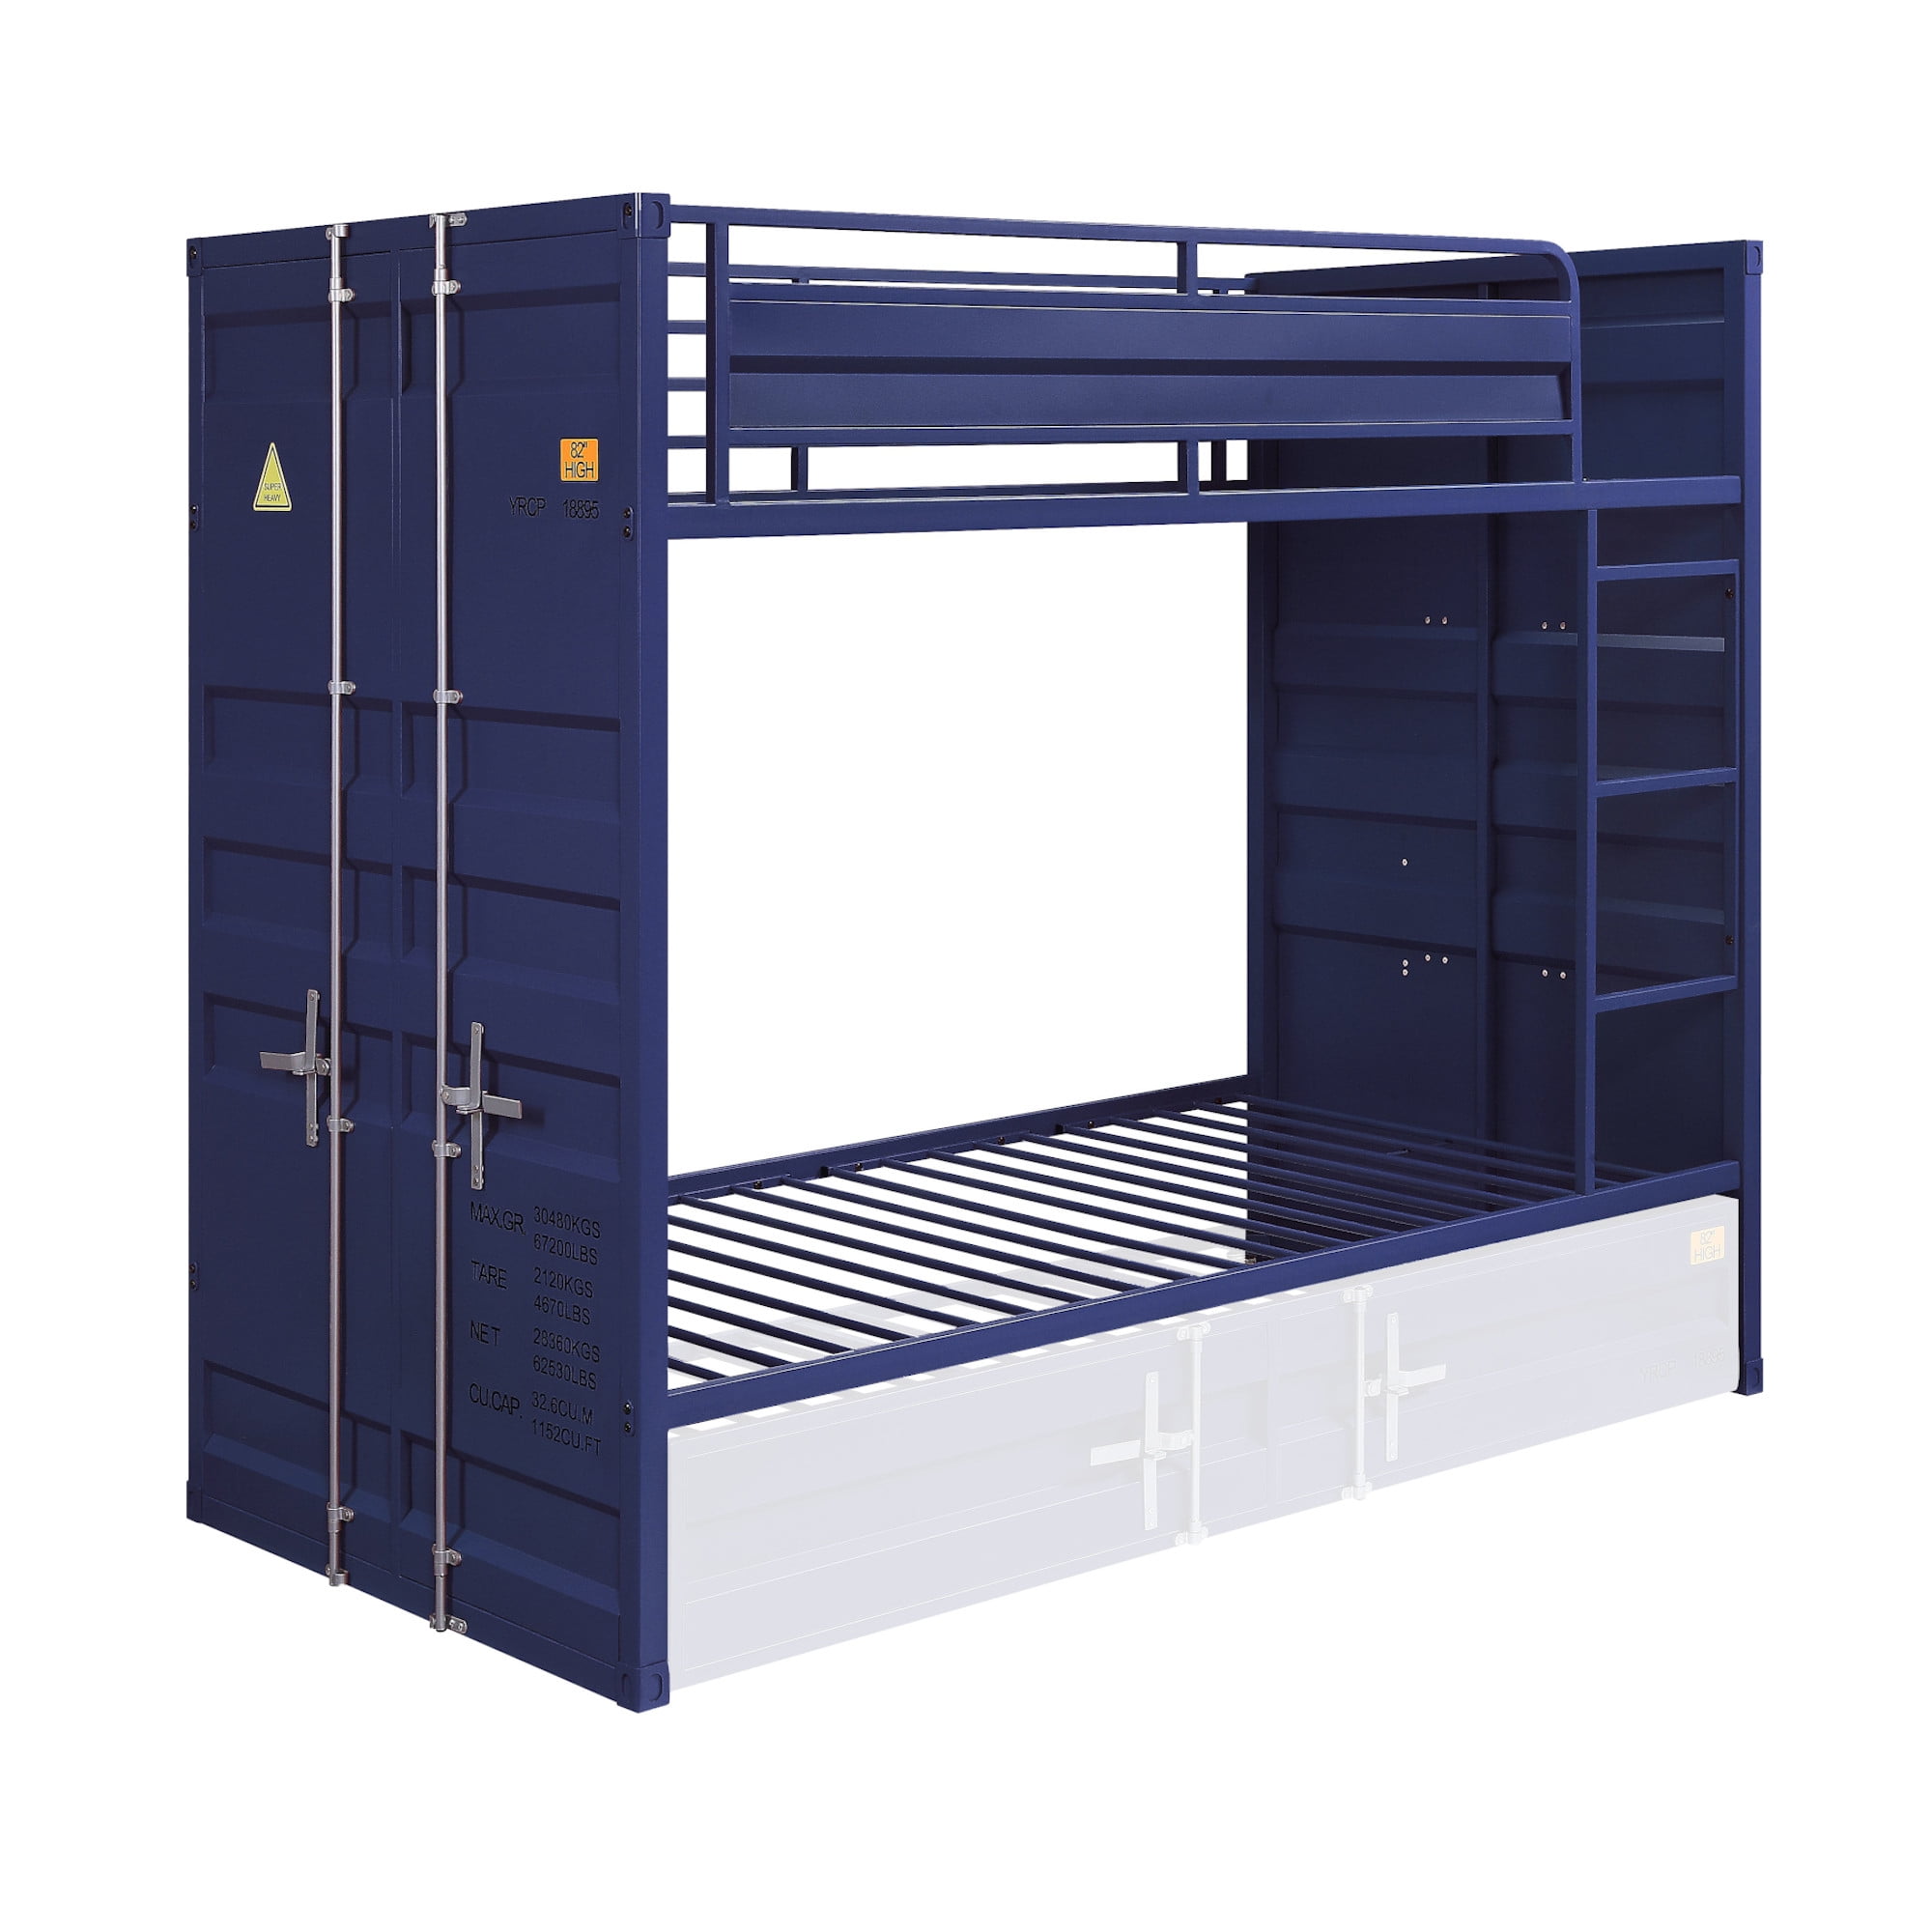 Picture of ACME Furniture 37900 Cargo Bunk Twin Bed without Trundle, Blue - 66 x 42 x 80 in.